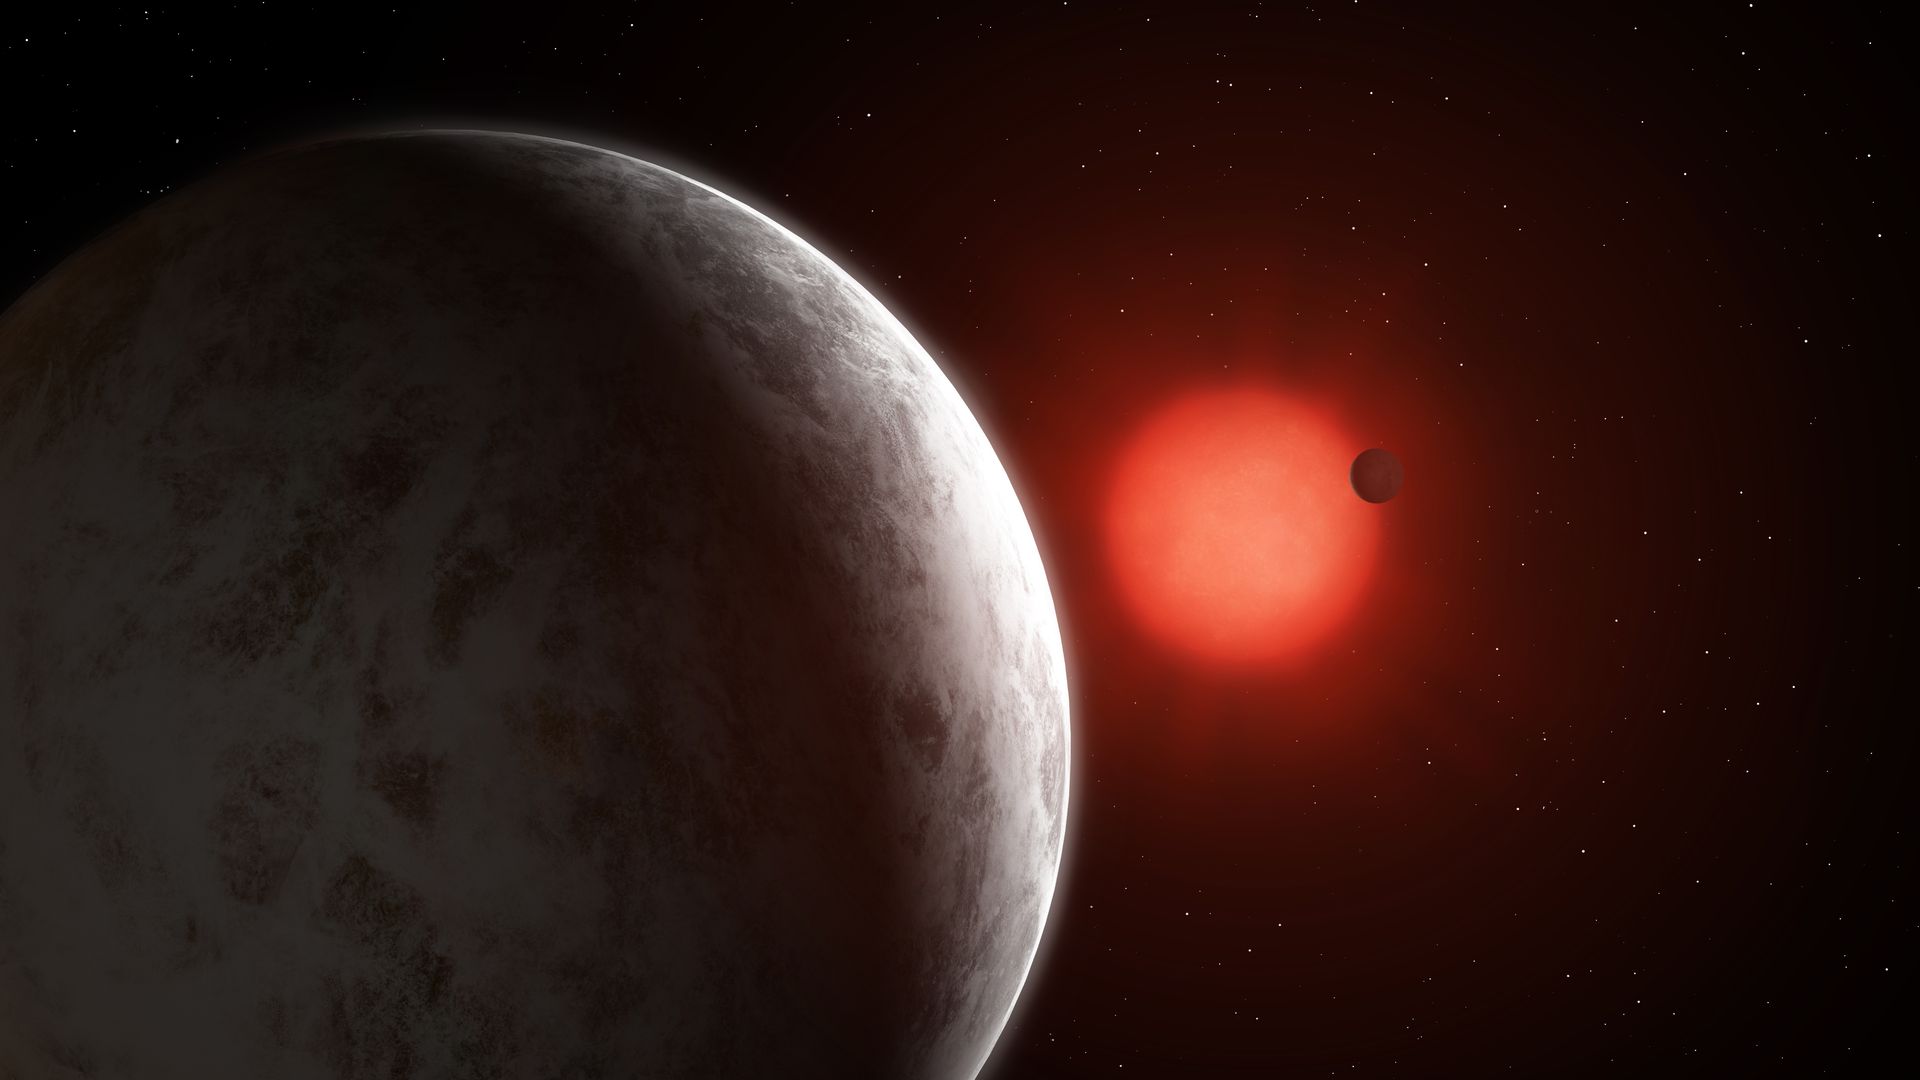 Artist’s impression of the multiplanetary system of Super Earths orbiting Gliese 887.